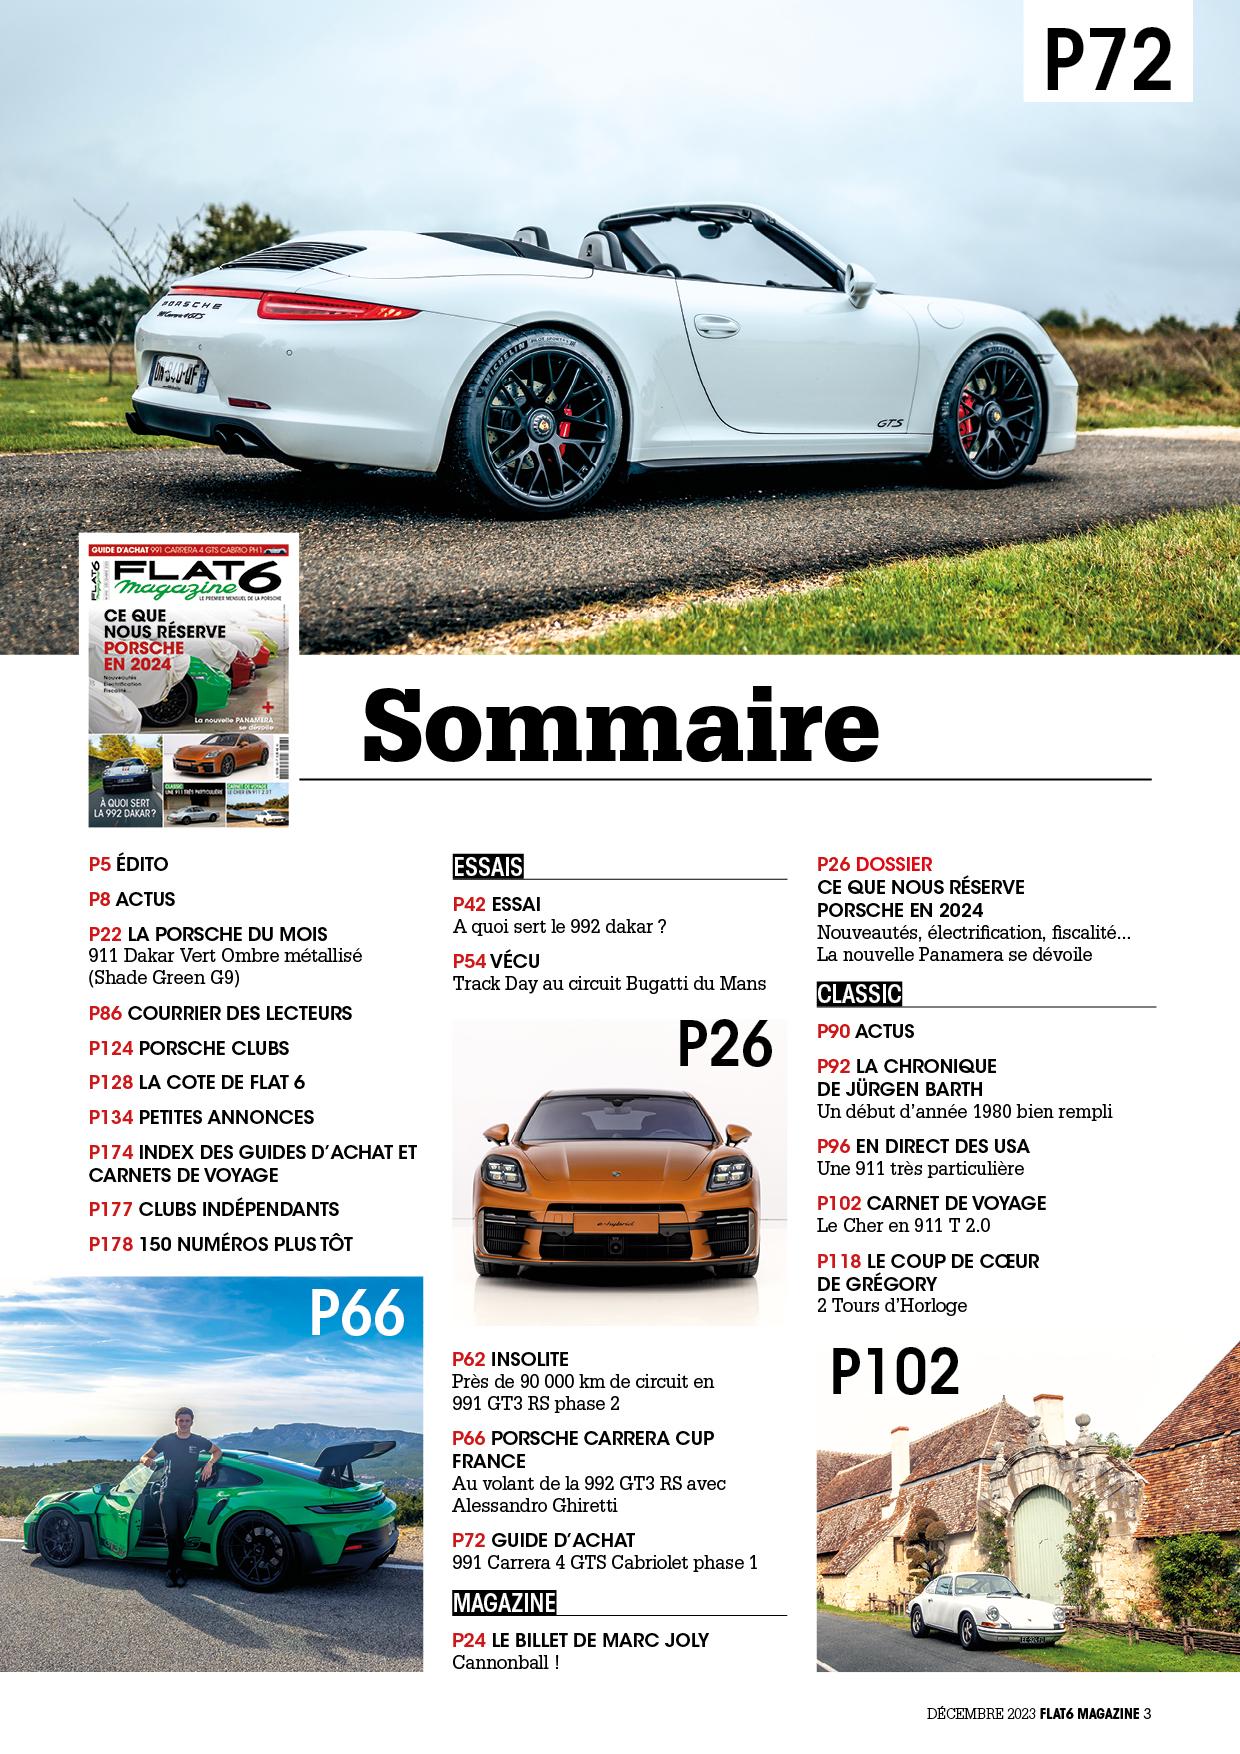 Sommaire393